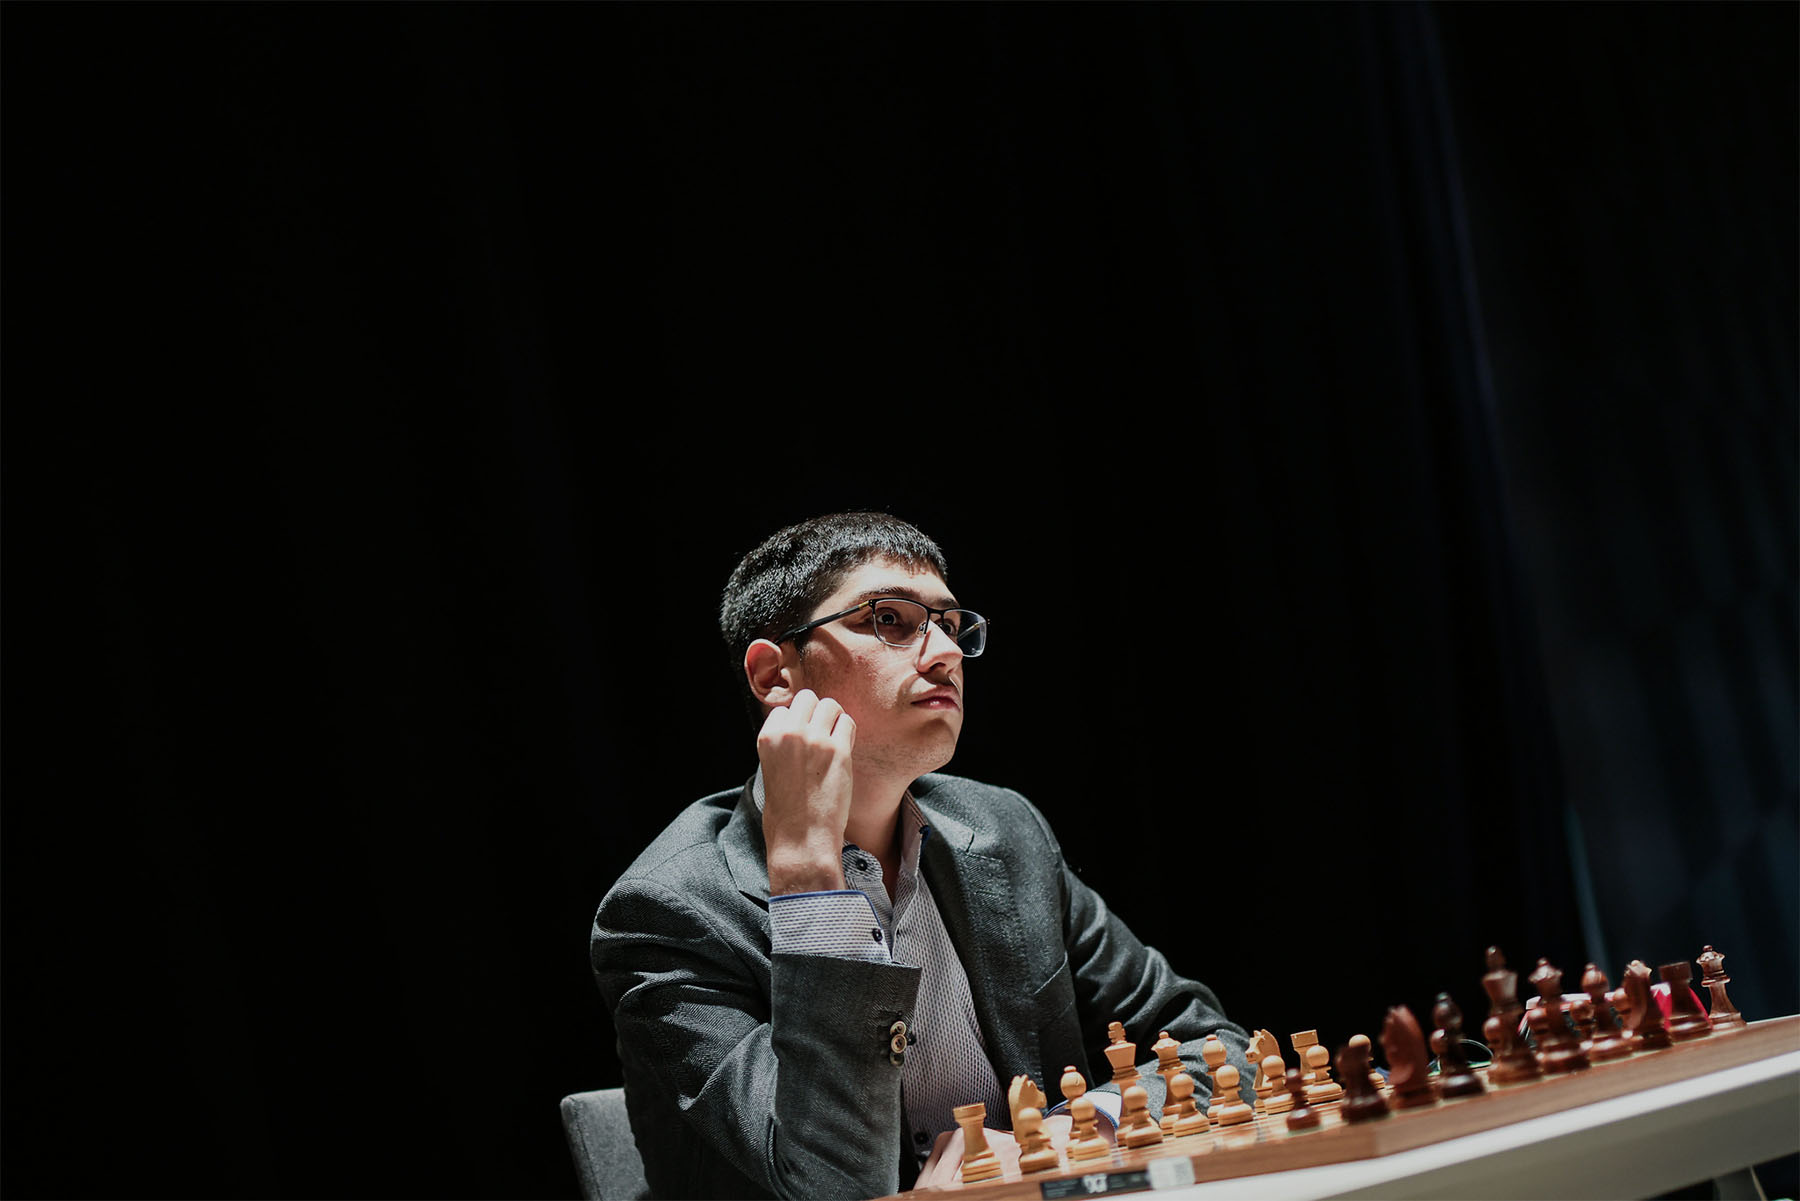 Alireza Firouzja: It is my main goal to qualify for the FIDE Candidates :  r/chess